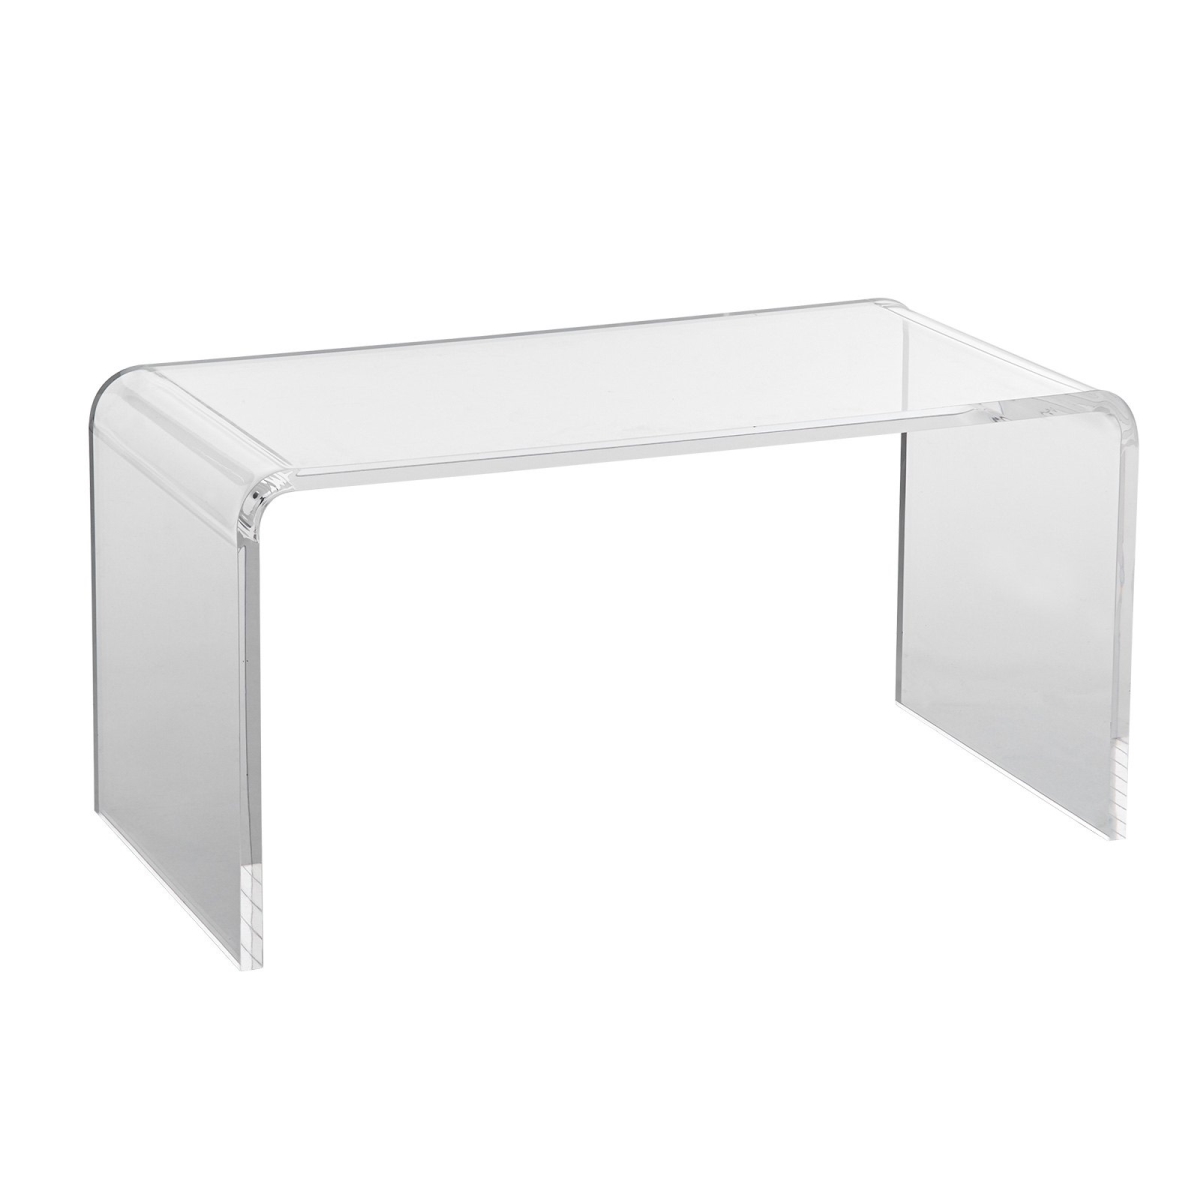 Picture of Vevor YKLKFZXTMSDGUZ3PAV0 16.3 in. C-Shaped Clear Acrylic End Table